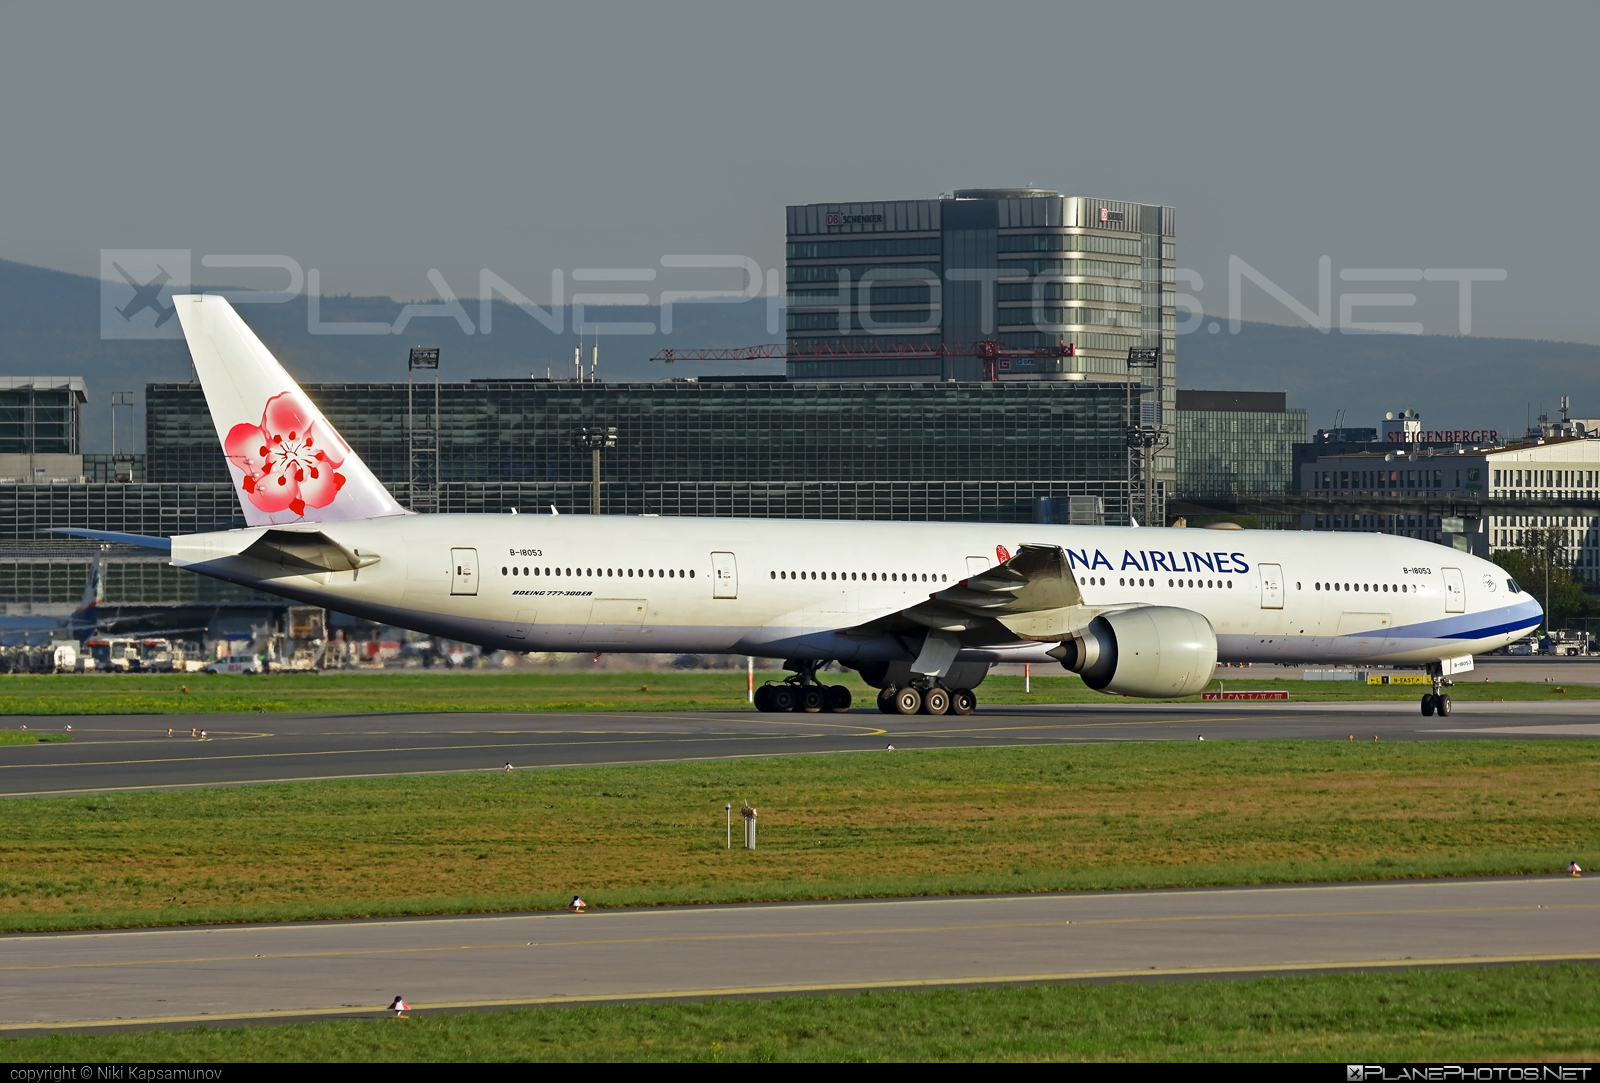 Boeing 777-300ER - B-18053 operated by China Airlines #b777 #b777er #boeing #boeing777 #chinaairlines #tripleseven